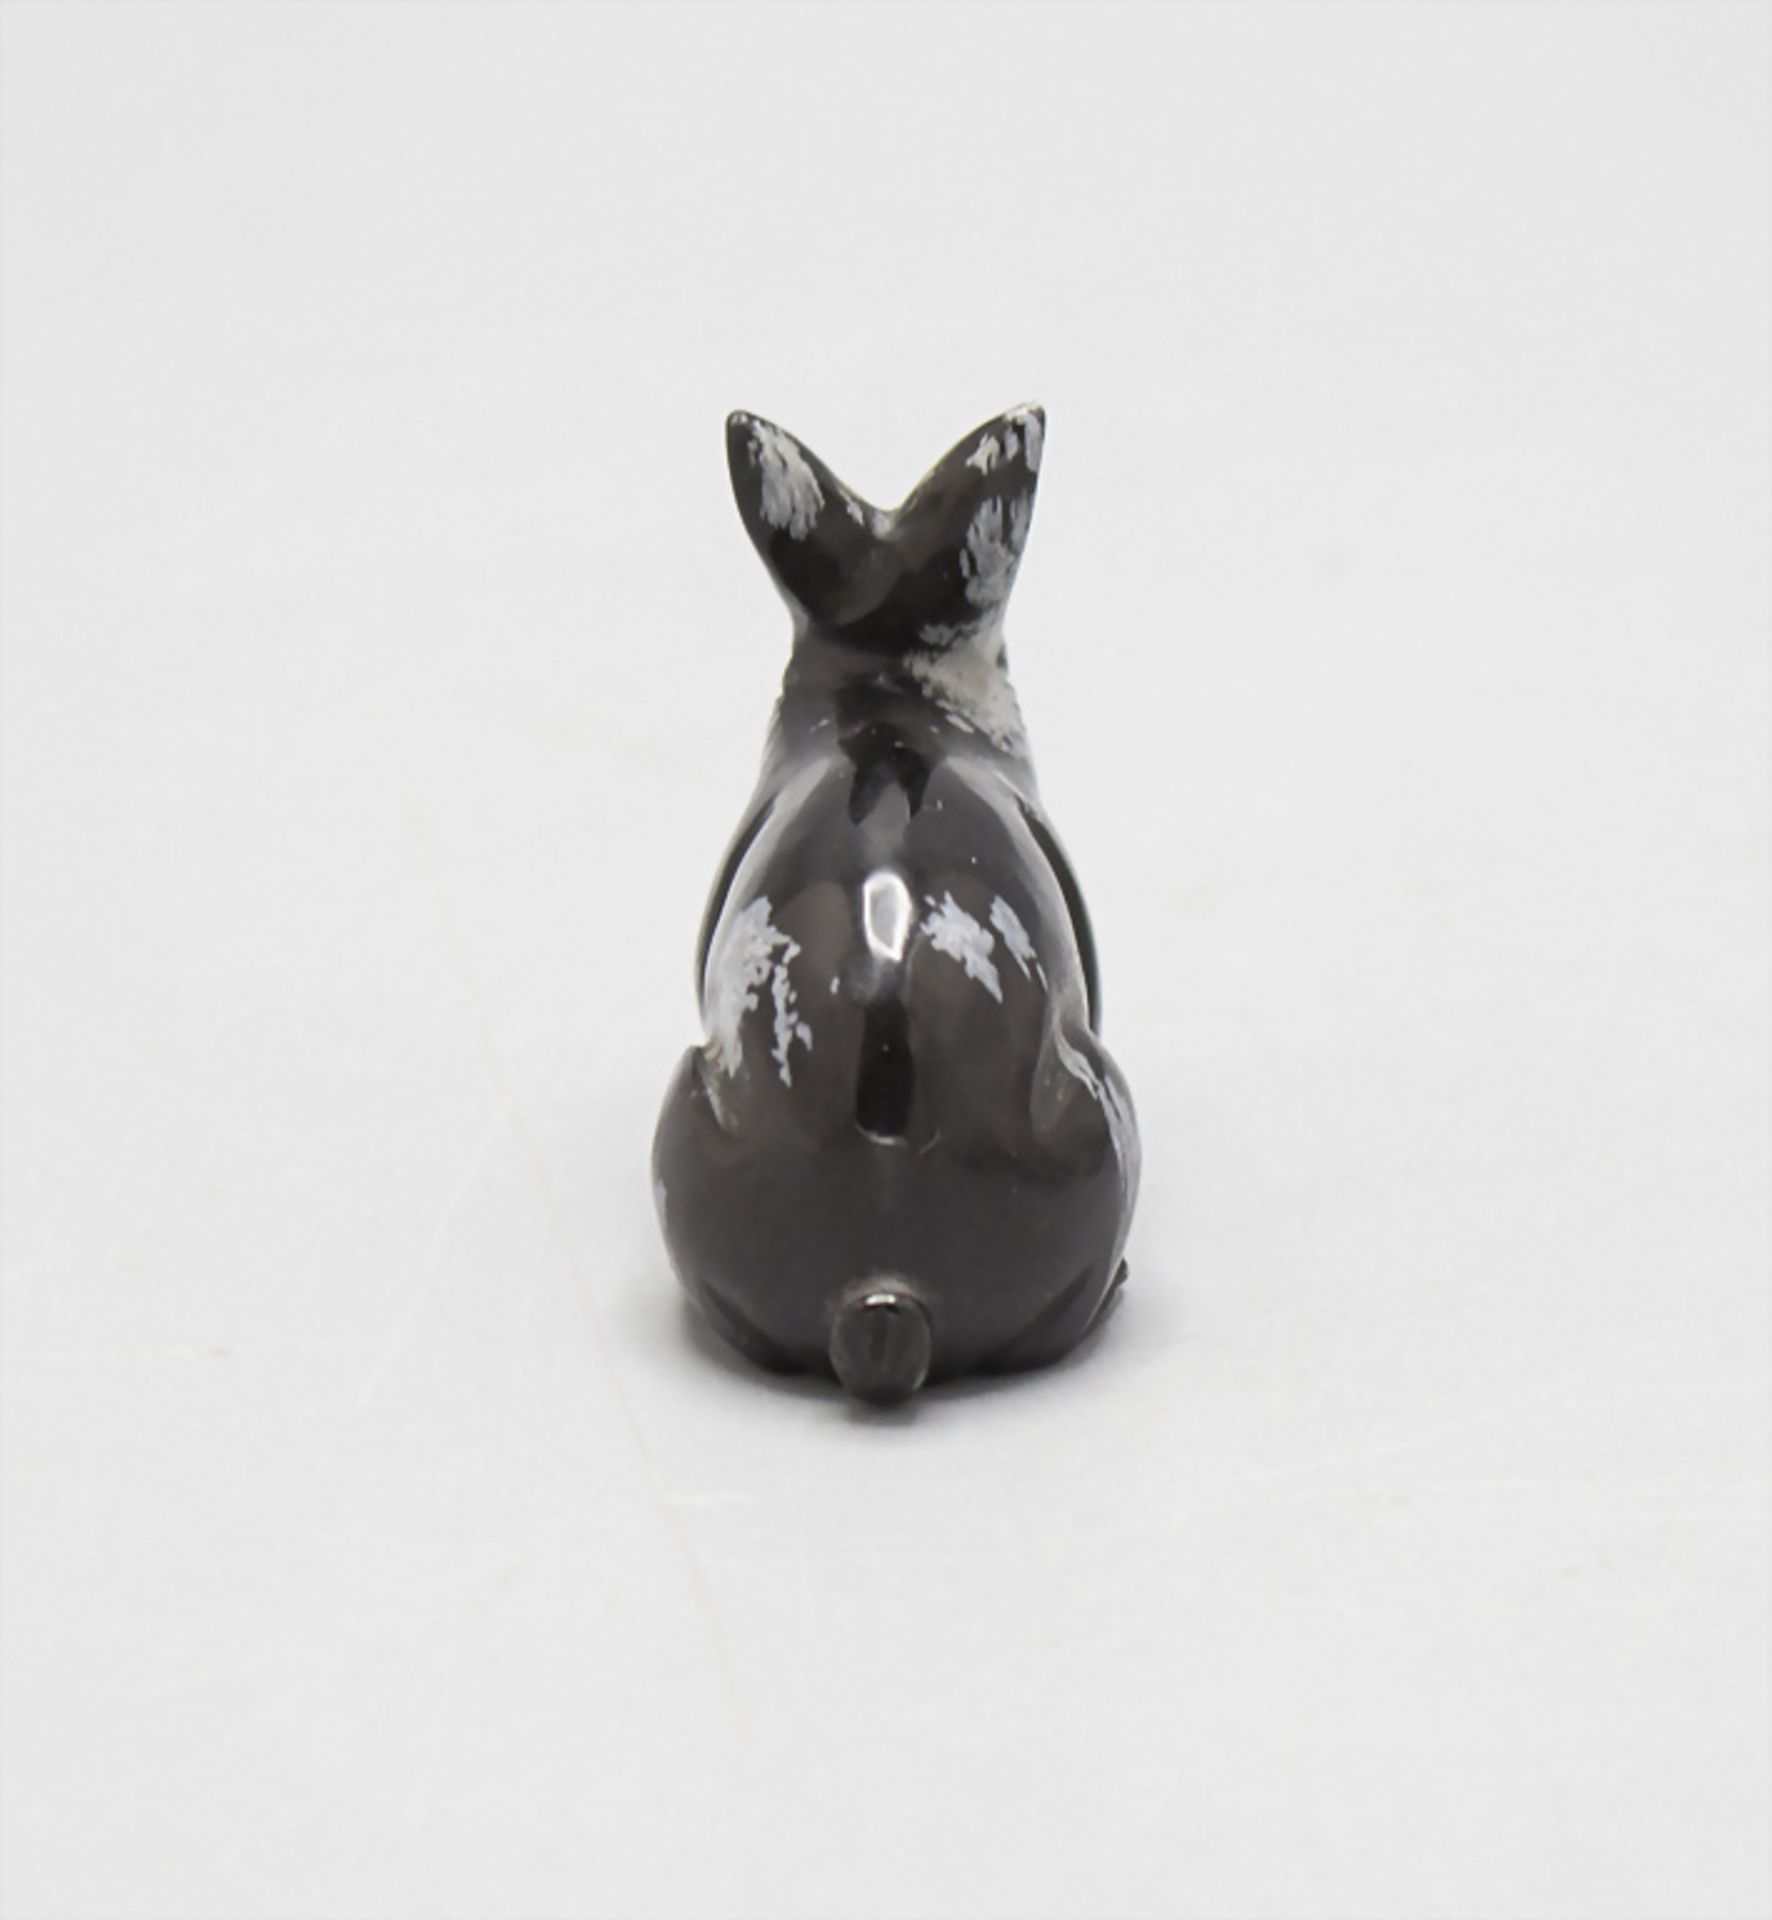 Miniatur Steinfigur 'Kaninchen' / A miniature carved stone rabbit, China, 20. Jh, - Image 3 of 4